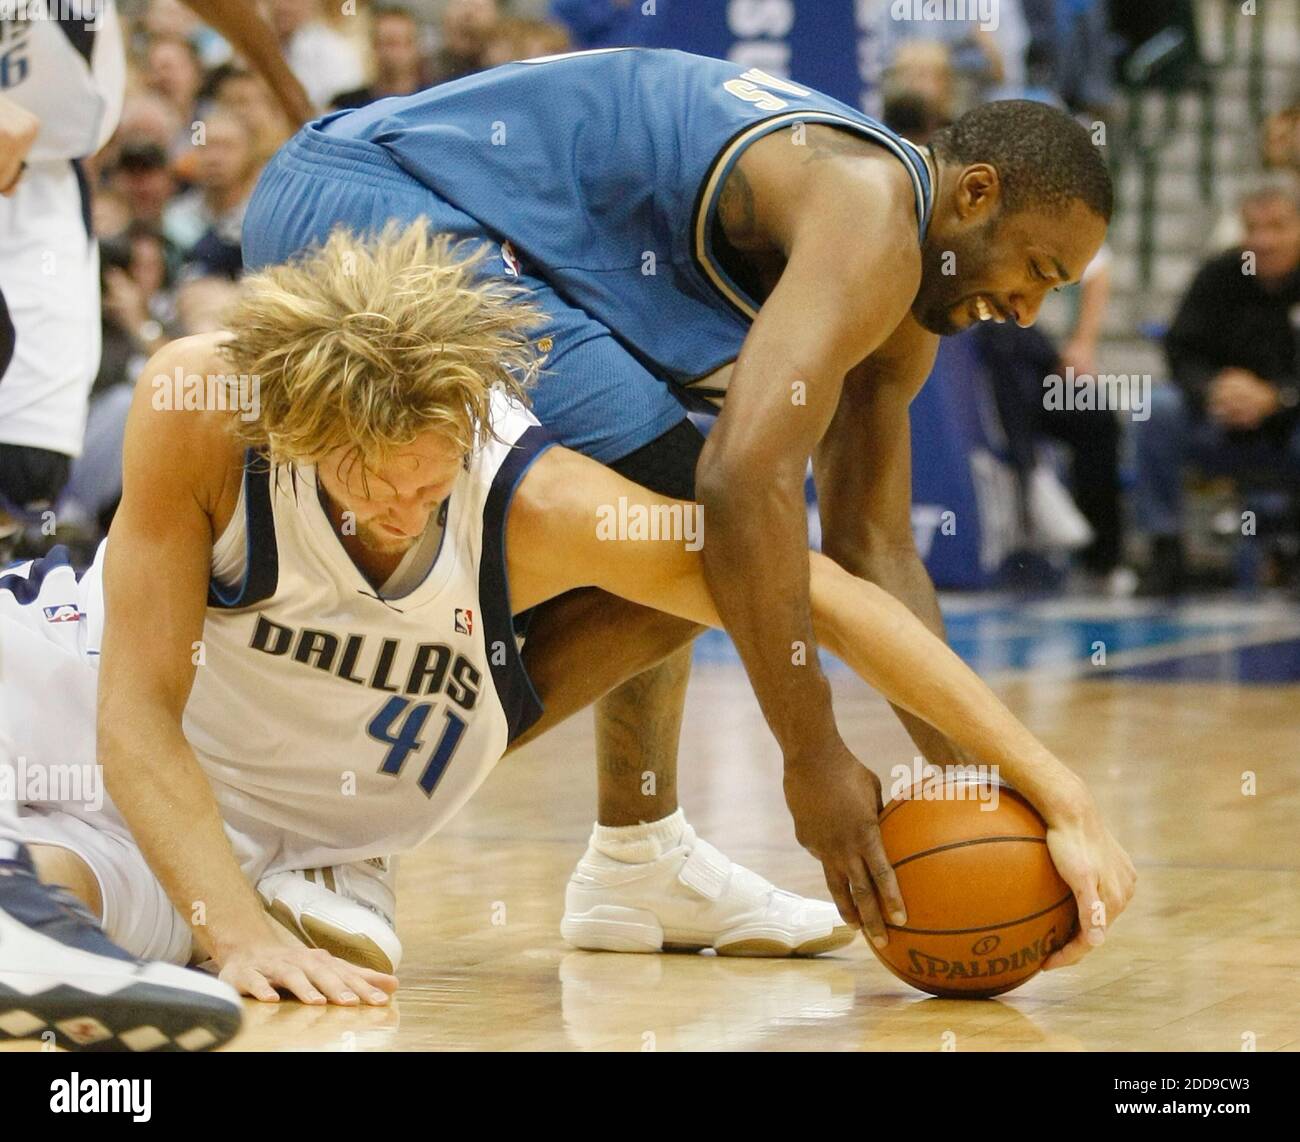 NO FILM, NO VIDEO, NO TV, NO DOCUMENTARY - Dallas Mavericks center Dirk Nowitzki (left) and Washington Wizards guard Gilbert Arenas (top) fight for a loose ball in the first half of an NBA basketball game at the American Airlines Center in Dallas, TX, USA on October 27, 2009. Photo by Kelley Chinn/Fort Worth Star-Telegram/MCT/ABACAPRESS.COM Stock Photo